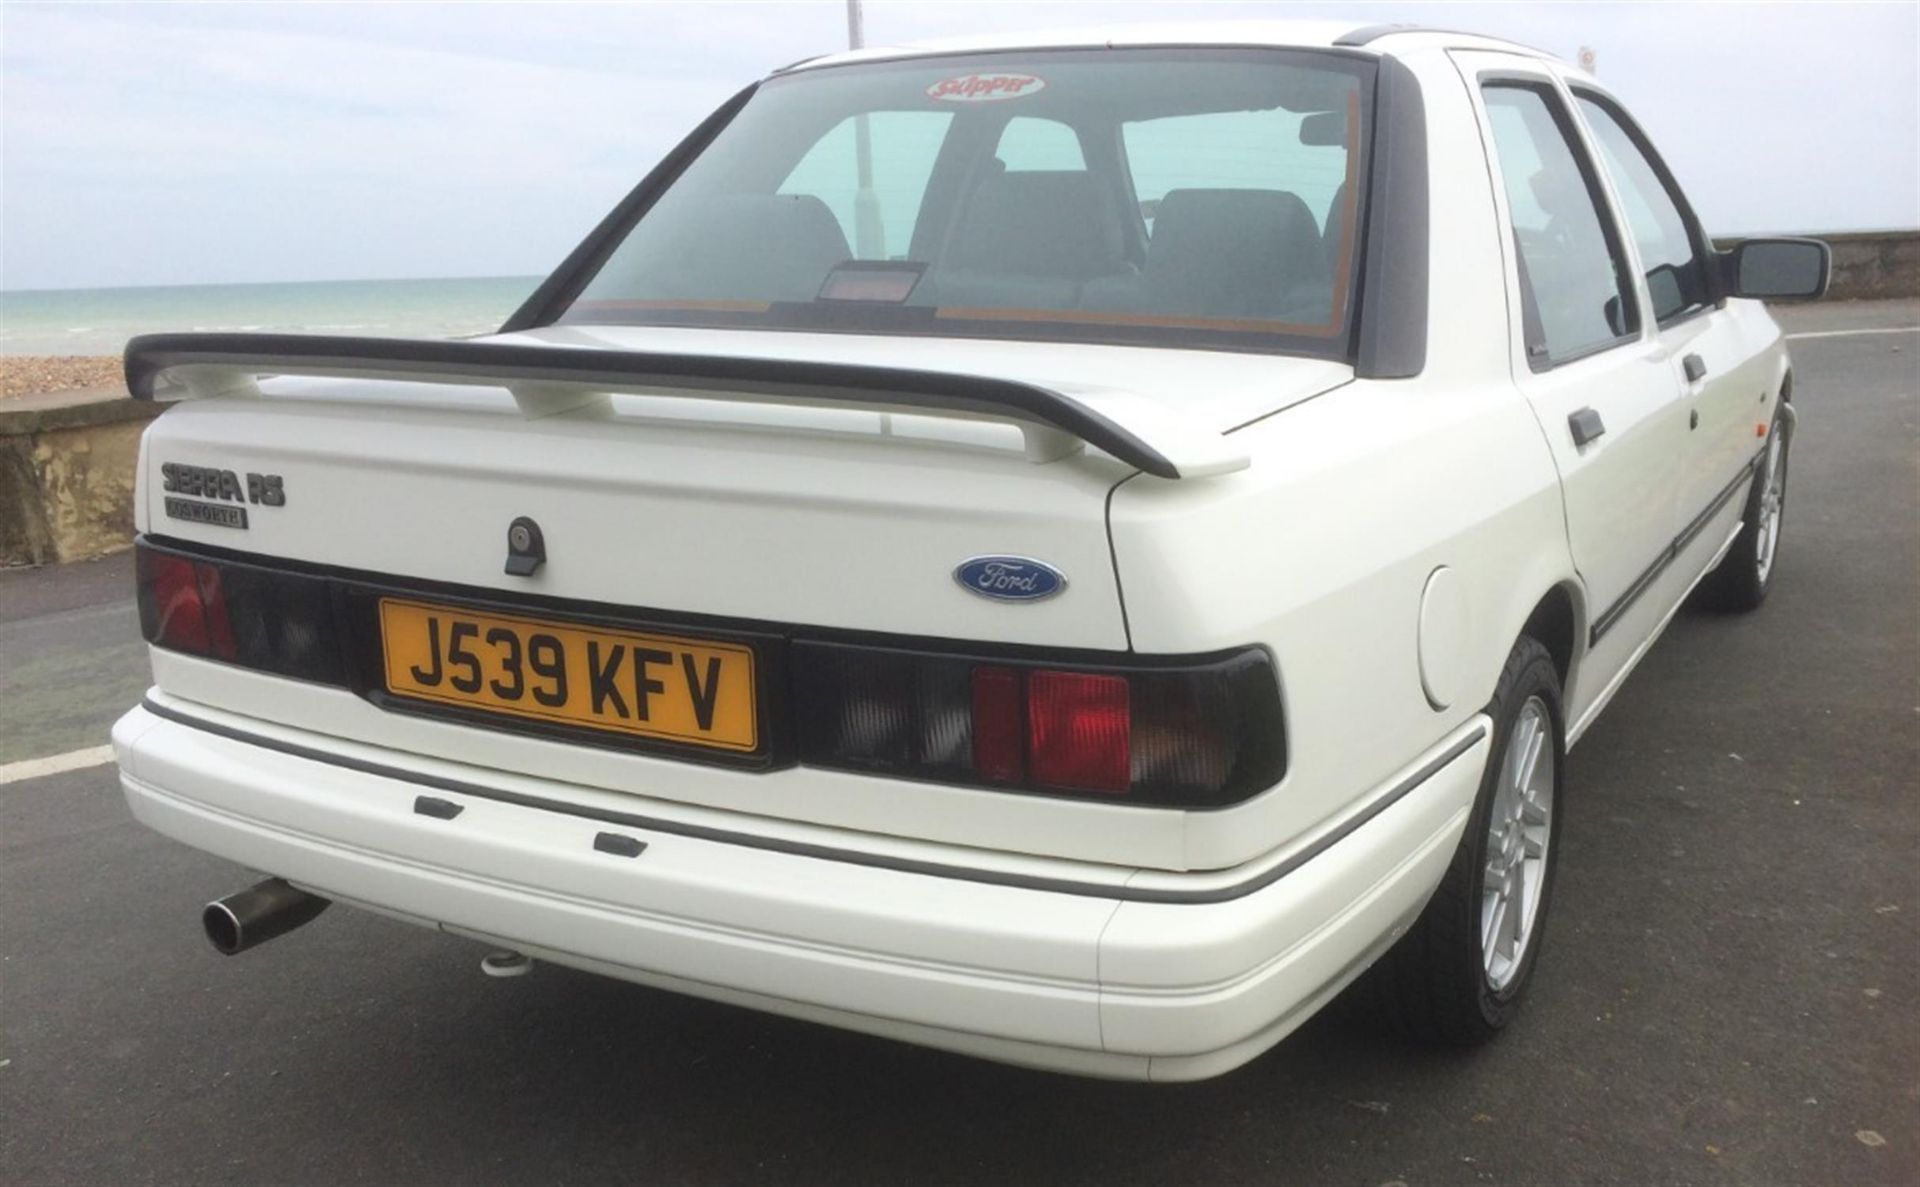 1991 Ford Sierra Sapphire RS Cosworth 4 x 4 - Image 3 of 5